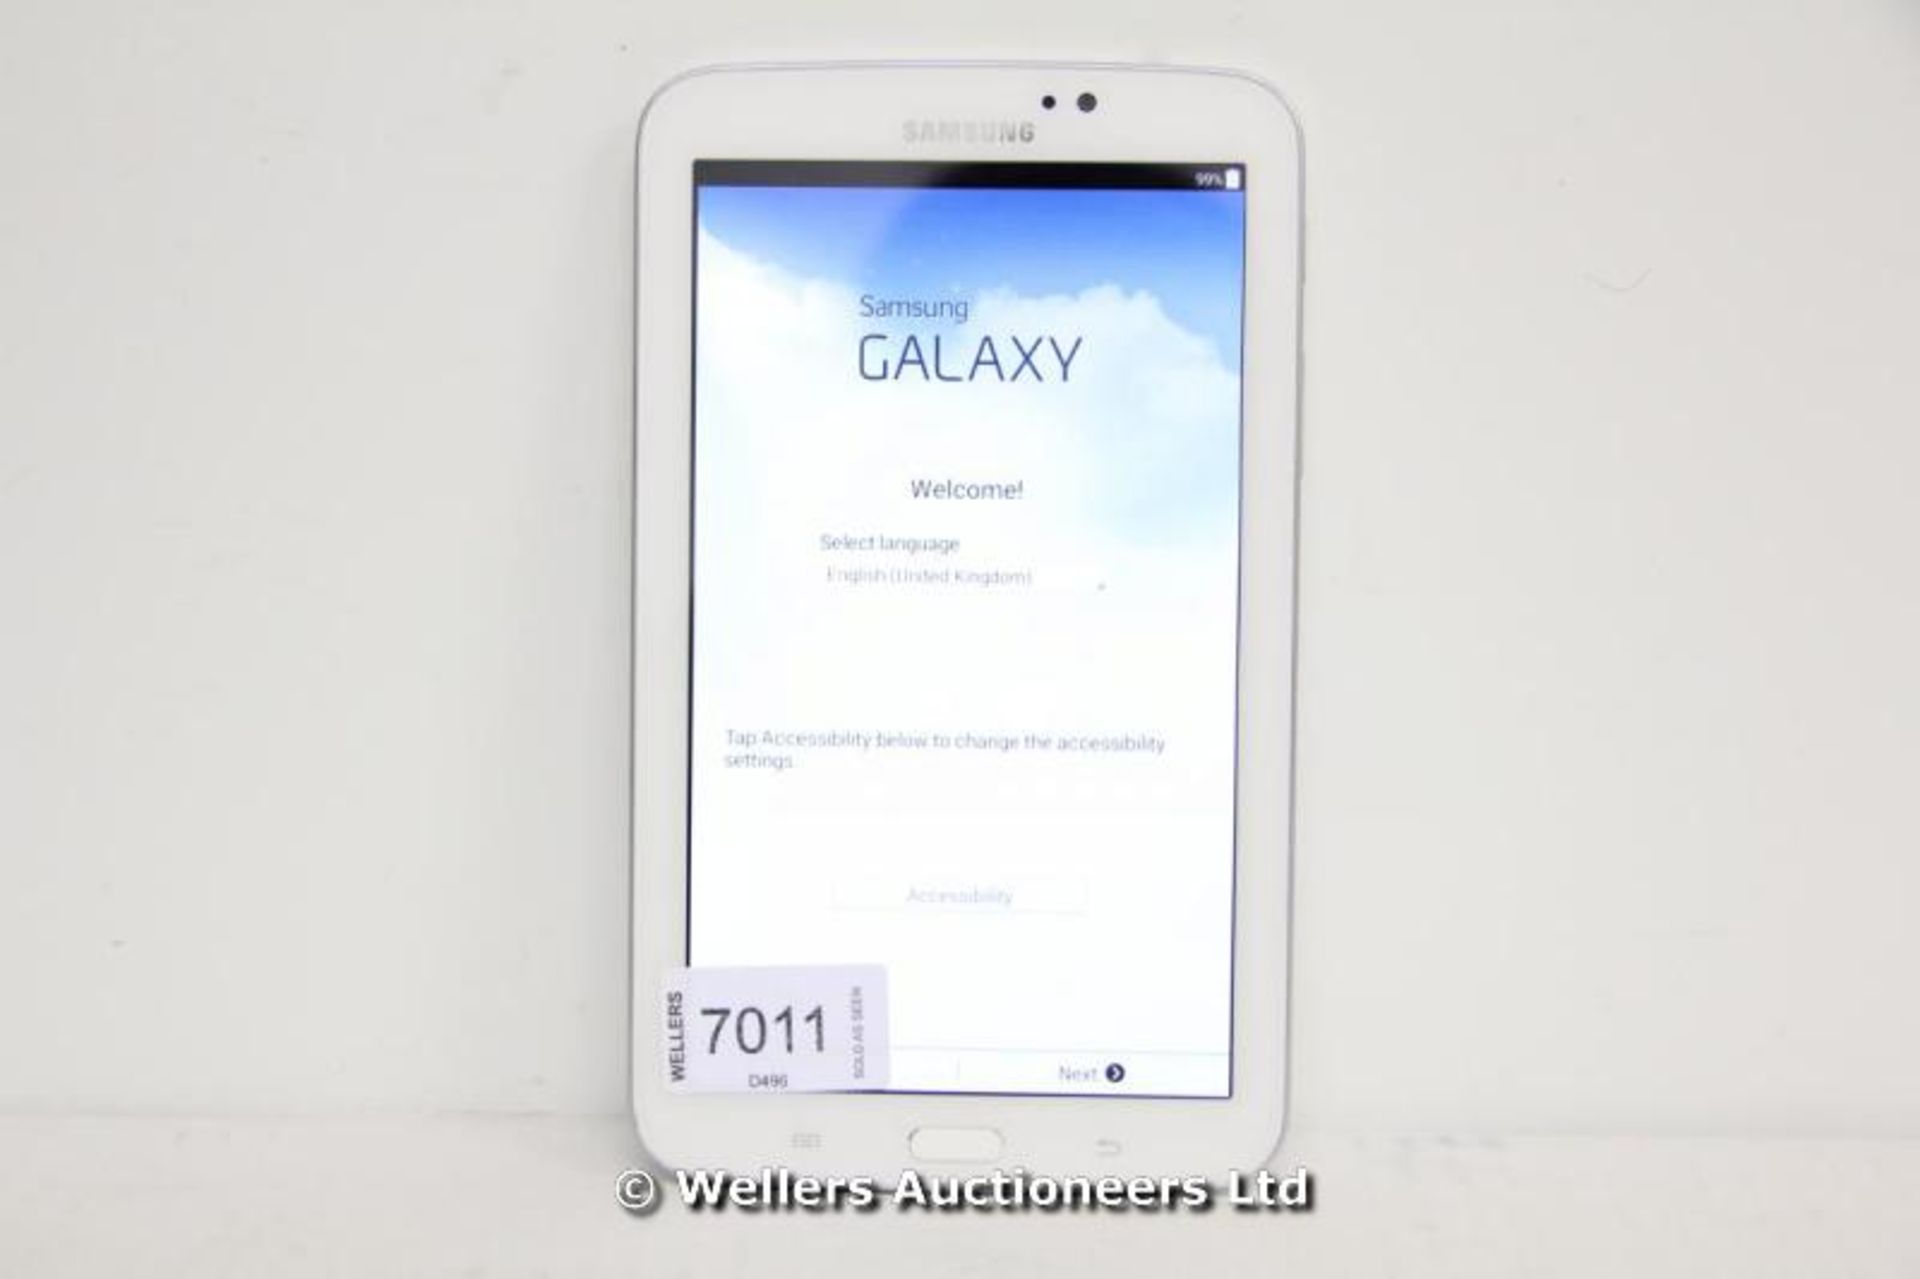 *"SAMSUNG TAB 3 7" TABLET / 1.2GHZ DUAL CORE PROCESSOR / RAM 1GB / 8GB HDD / ANDROID O/S / WITH